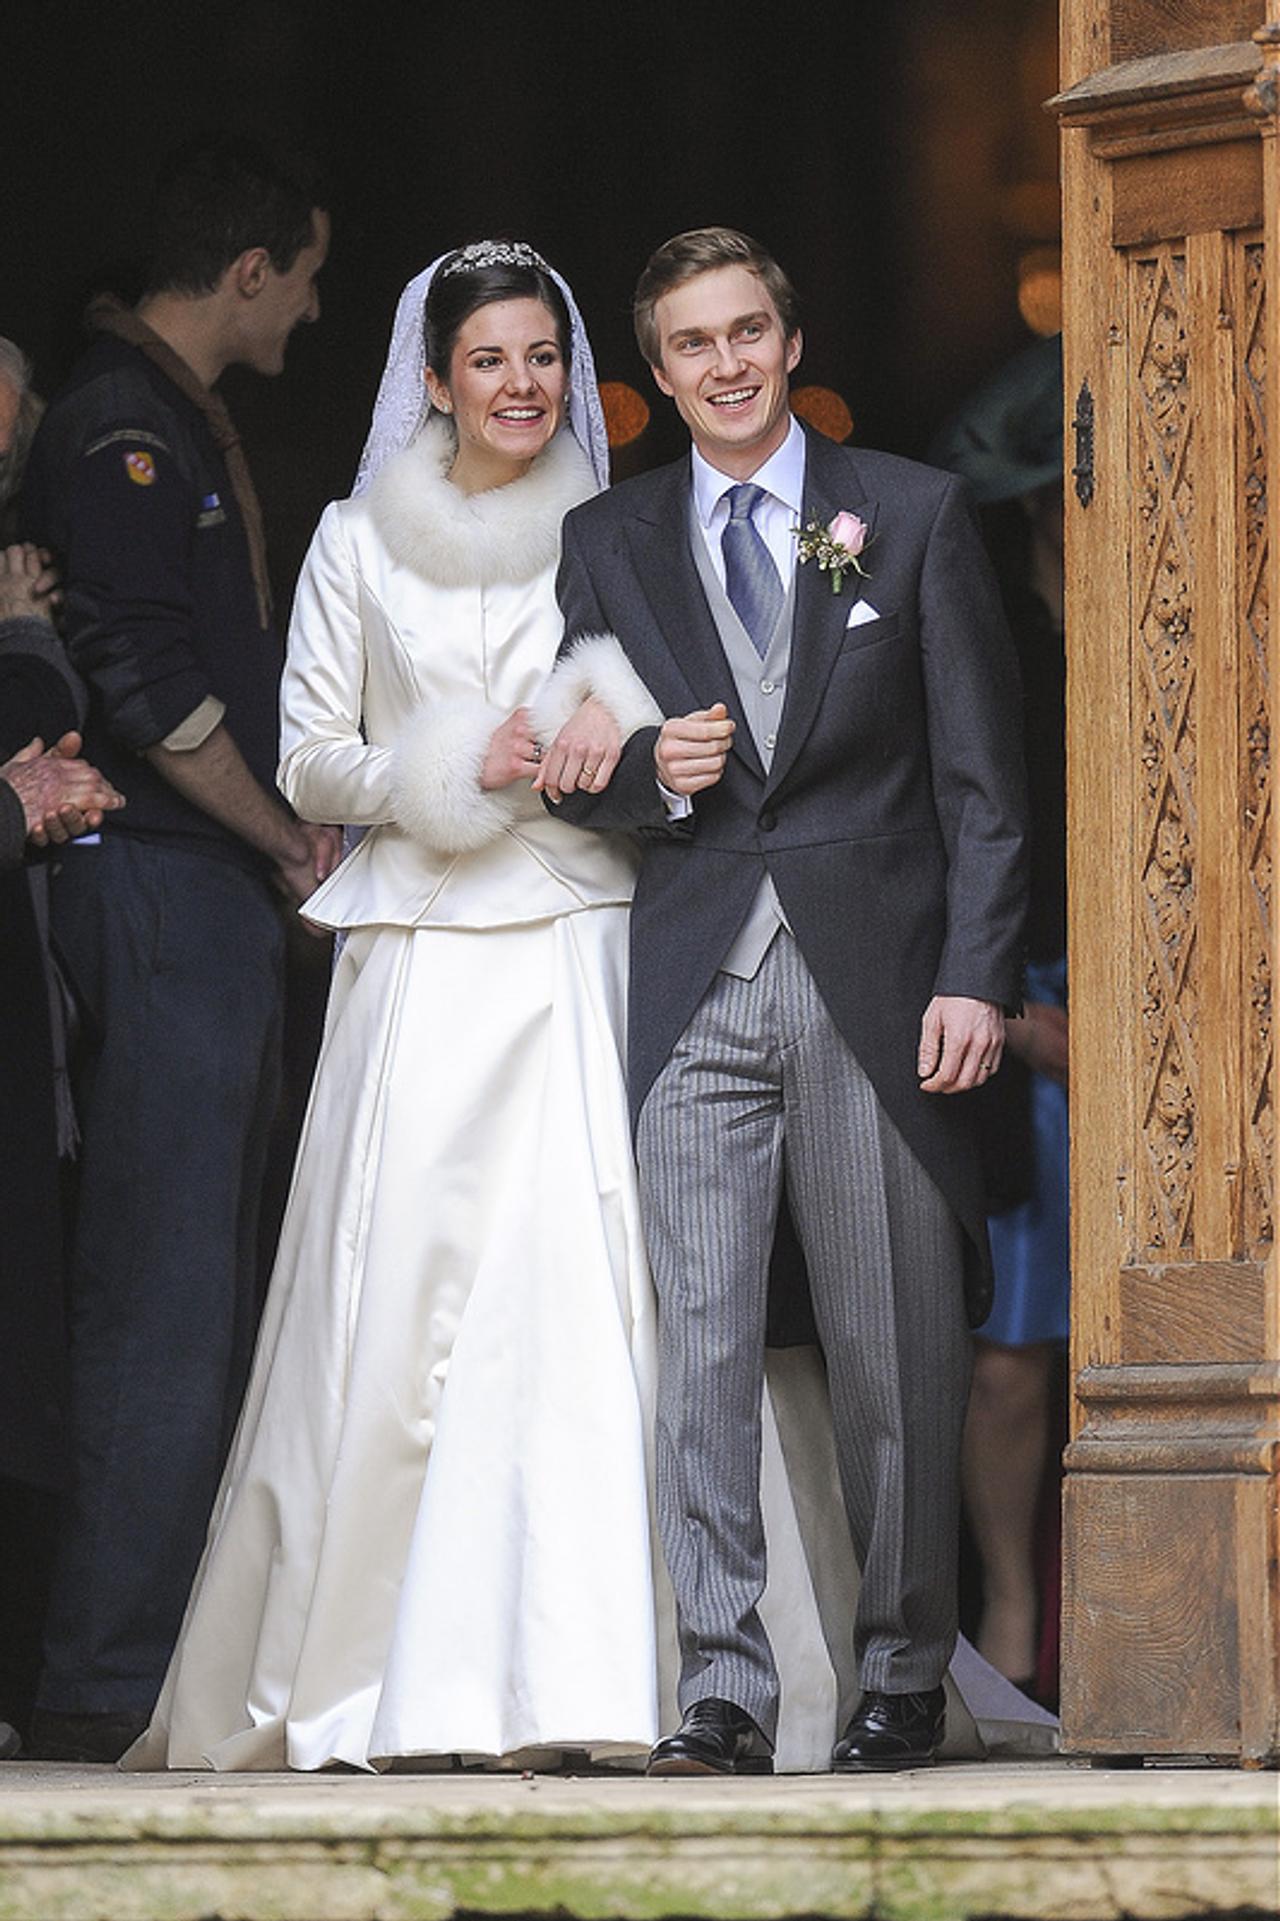 The wedding of Archduke Christoph of Austria - Entertainment.ie